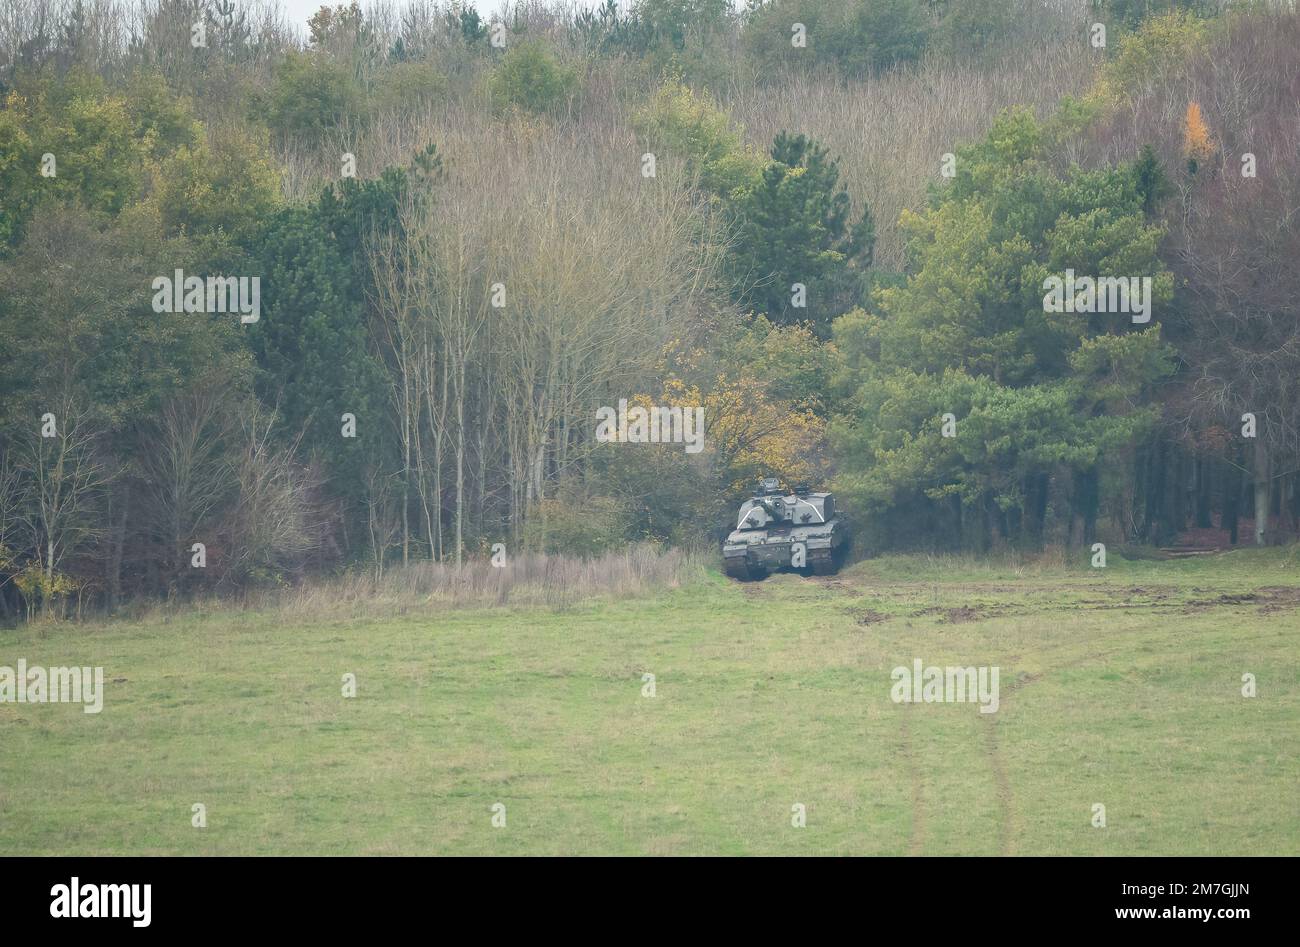 British army FV4034 Challenger 2 ii main battle tank on a military combat exercise, Wiltshire UK Stock Photo